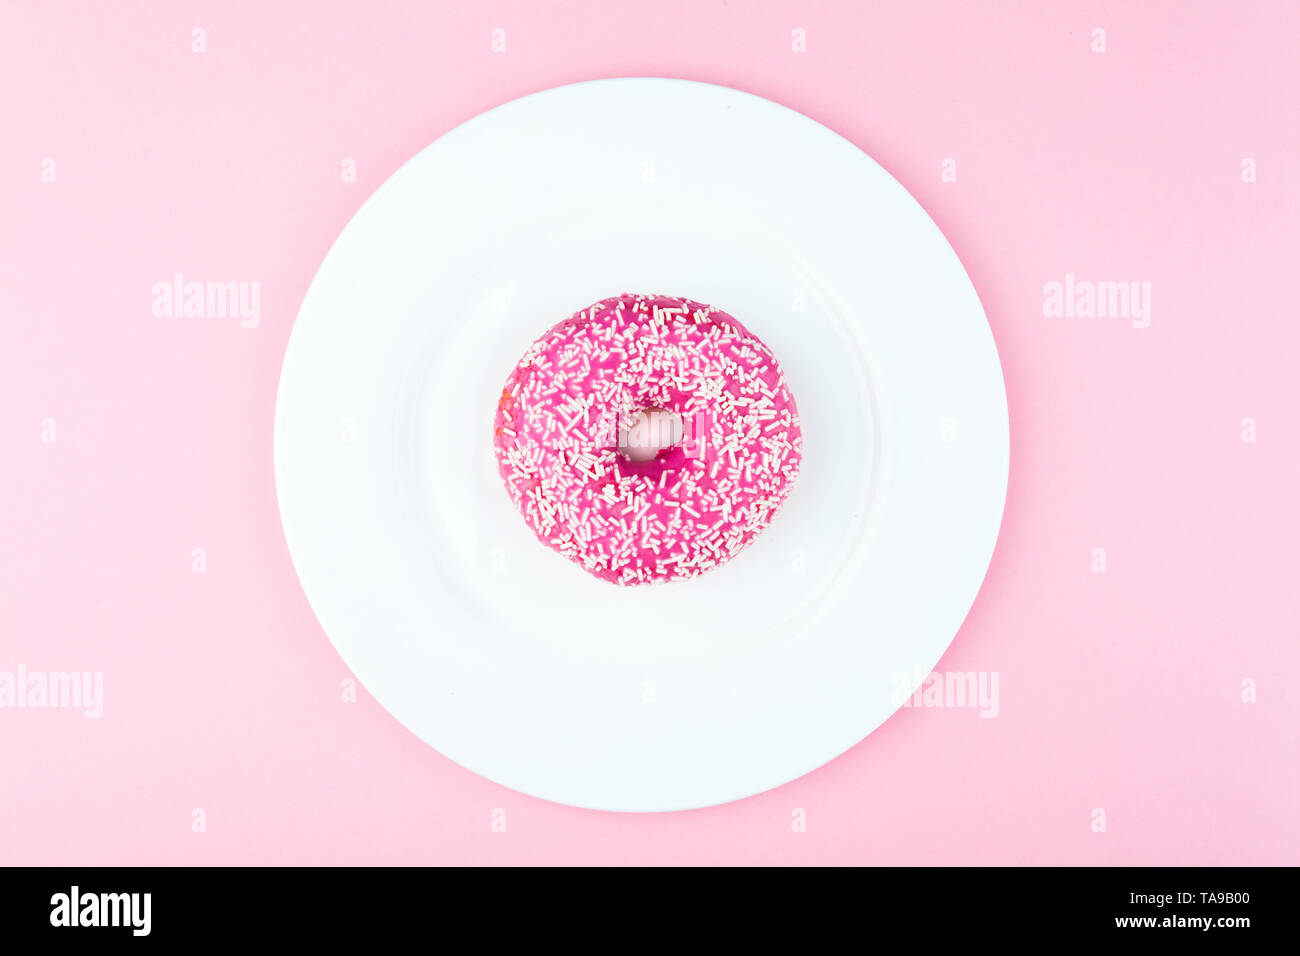 Pink round donut at bright pink background Stock Photo